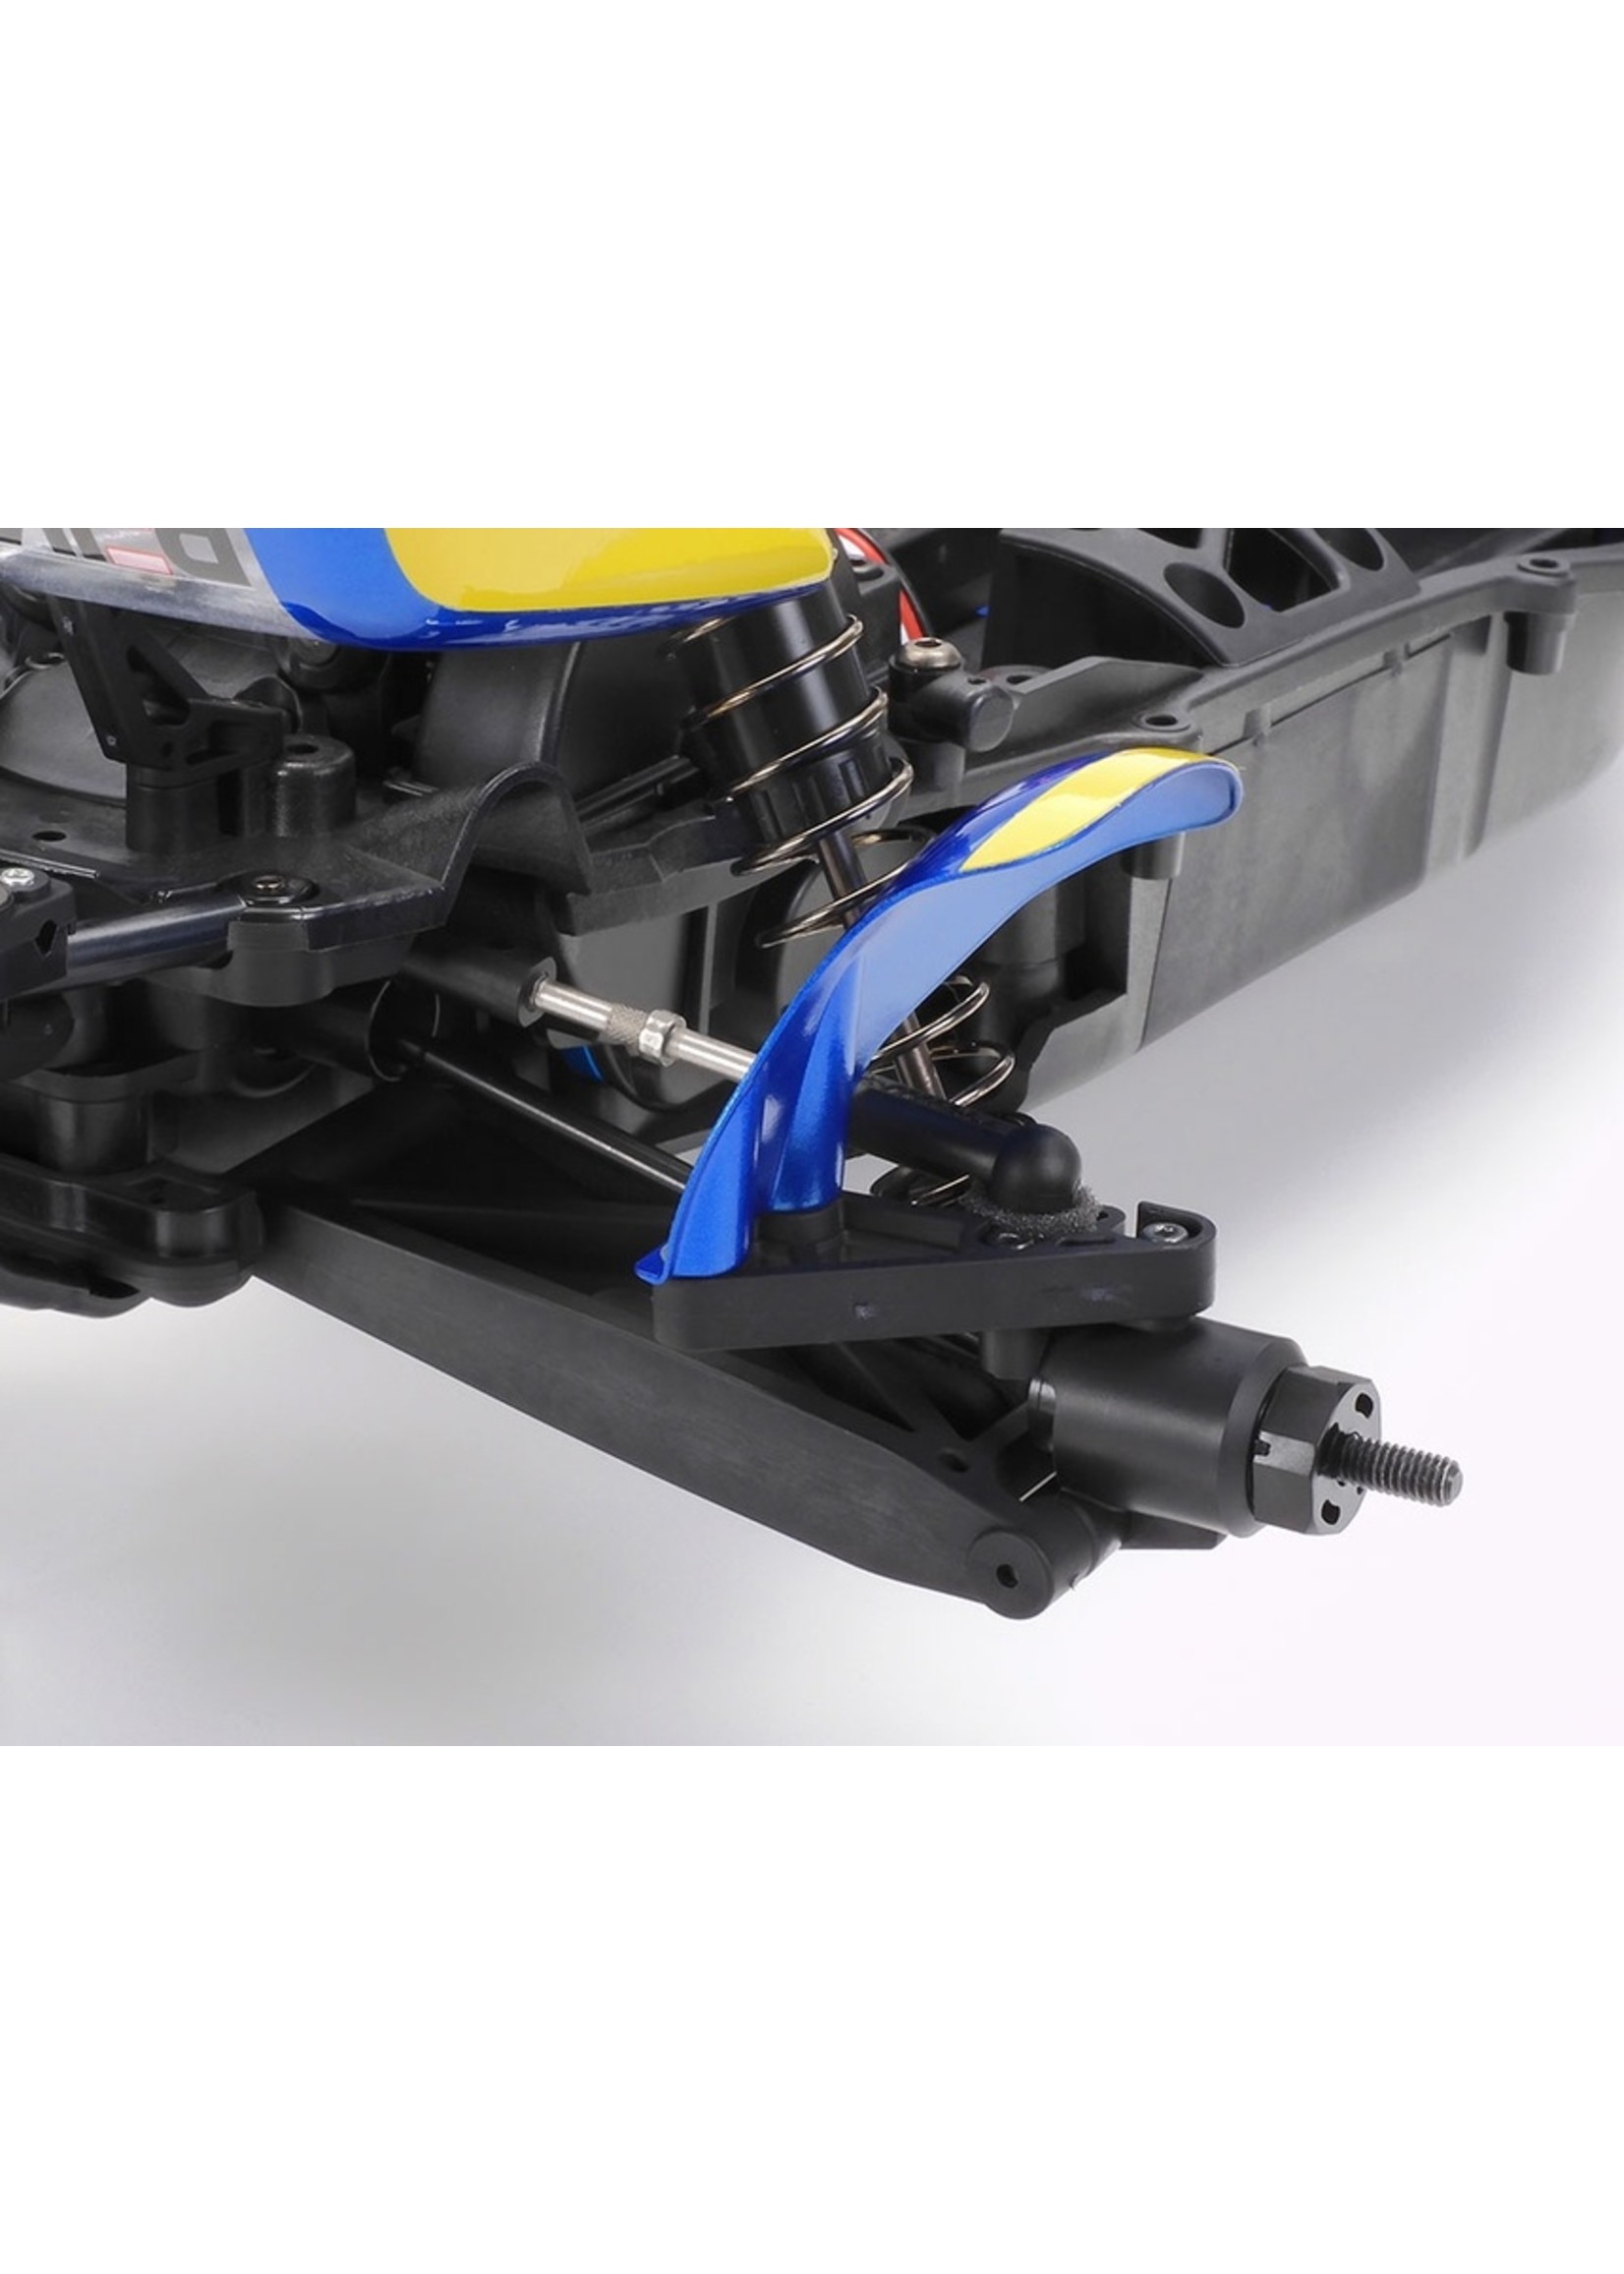 Tamiya 1/10 Super Avante Off-Road Buggy - TD4 Chassis Kit